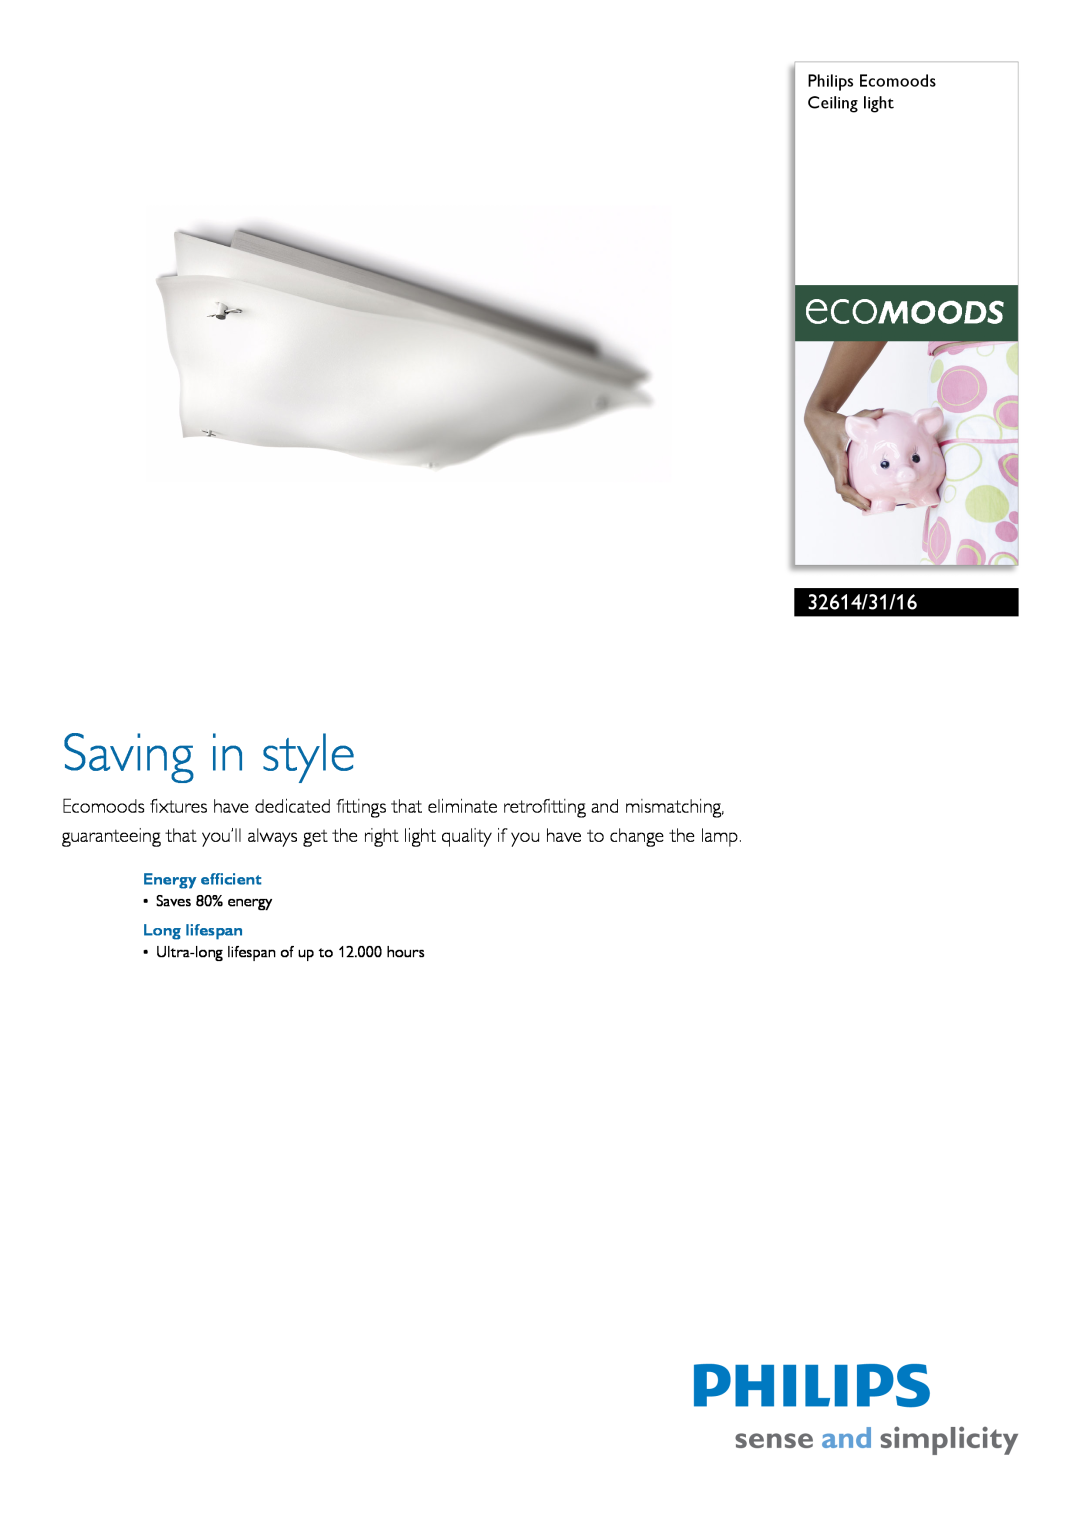 Philips 32614/31/16 manual Philips Ecomoods Ceiling light, Energy efficient, Long lifespan, Saving in style 